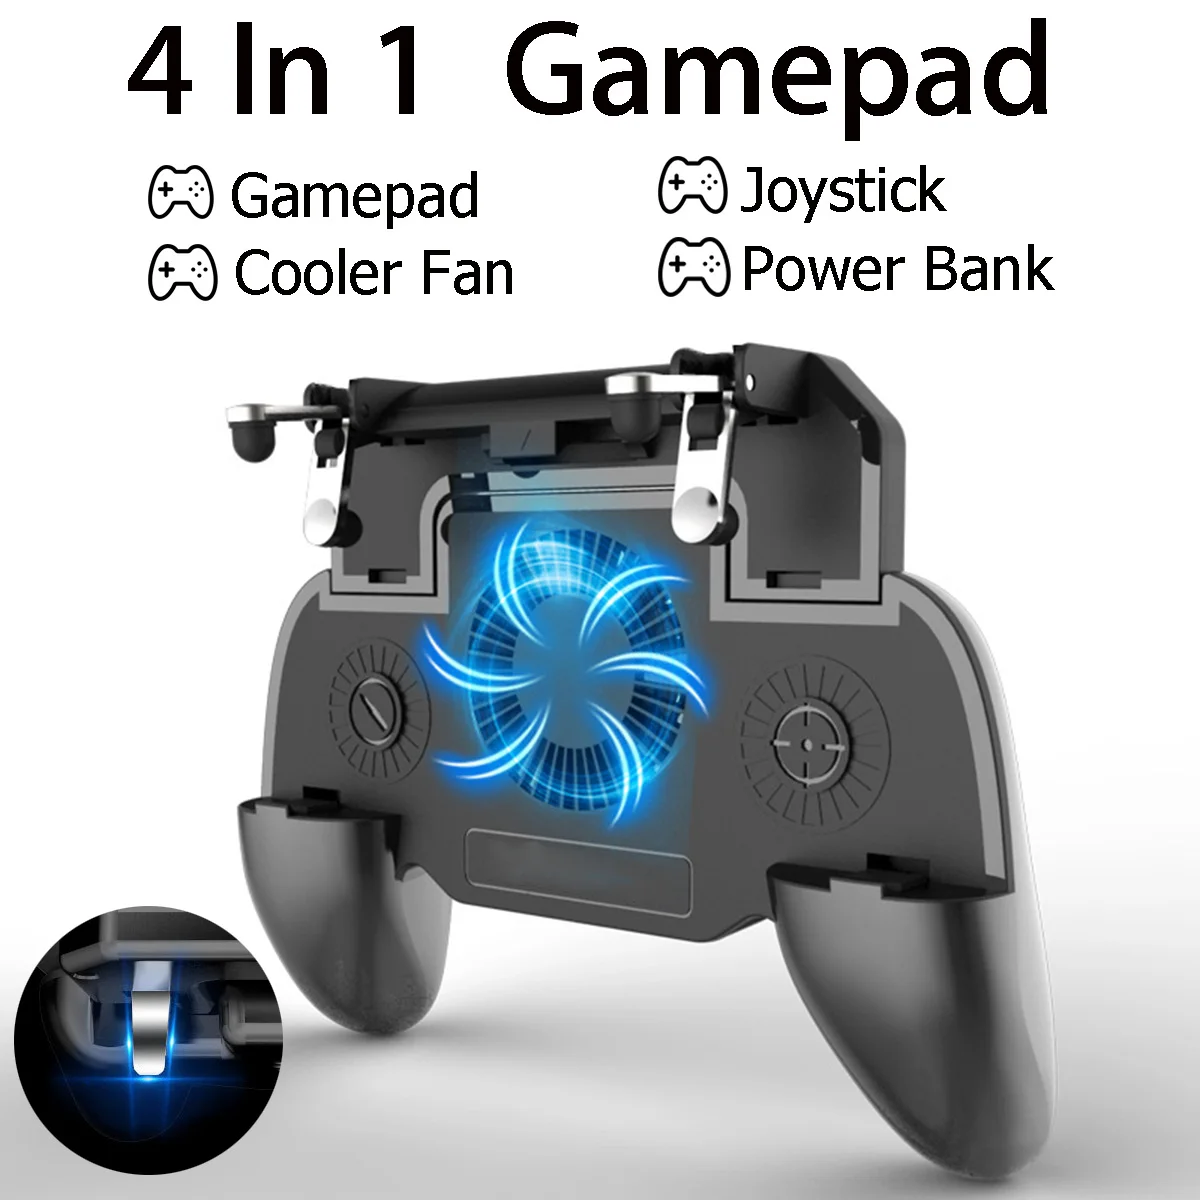 

Mobile GamePad Joystick For PUBG Cooler Fan L1 R1 Shooter Controller Handle Smartphone Trigger with 2000/4000mAh Power Bank